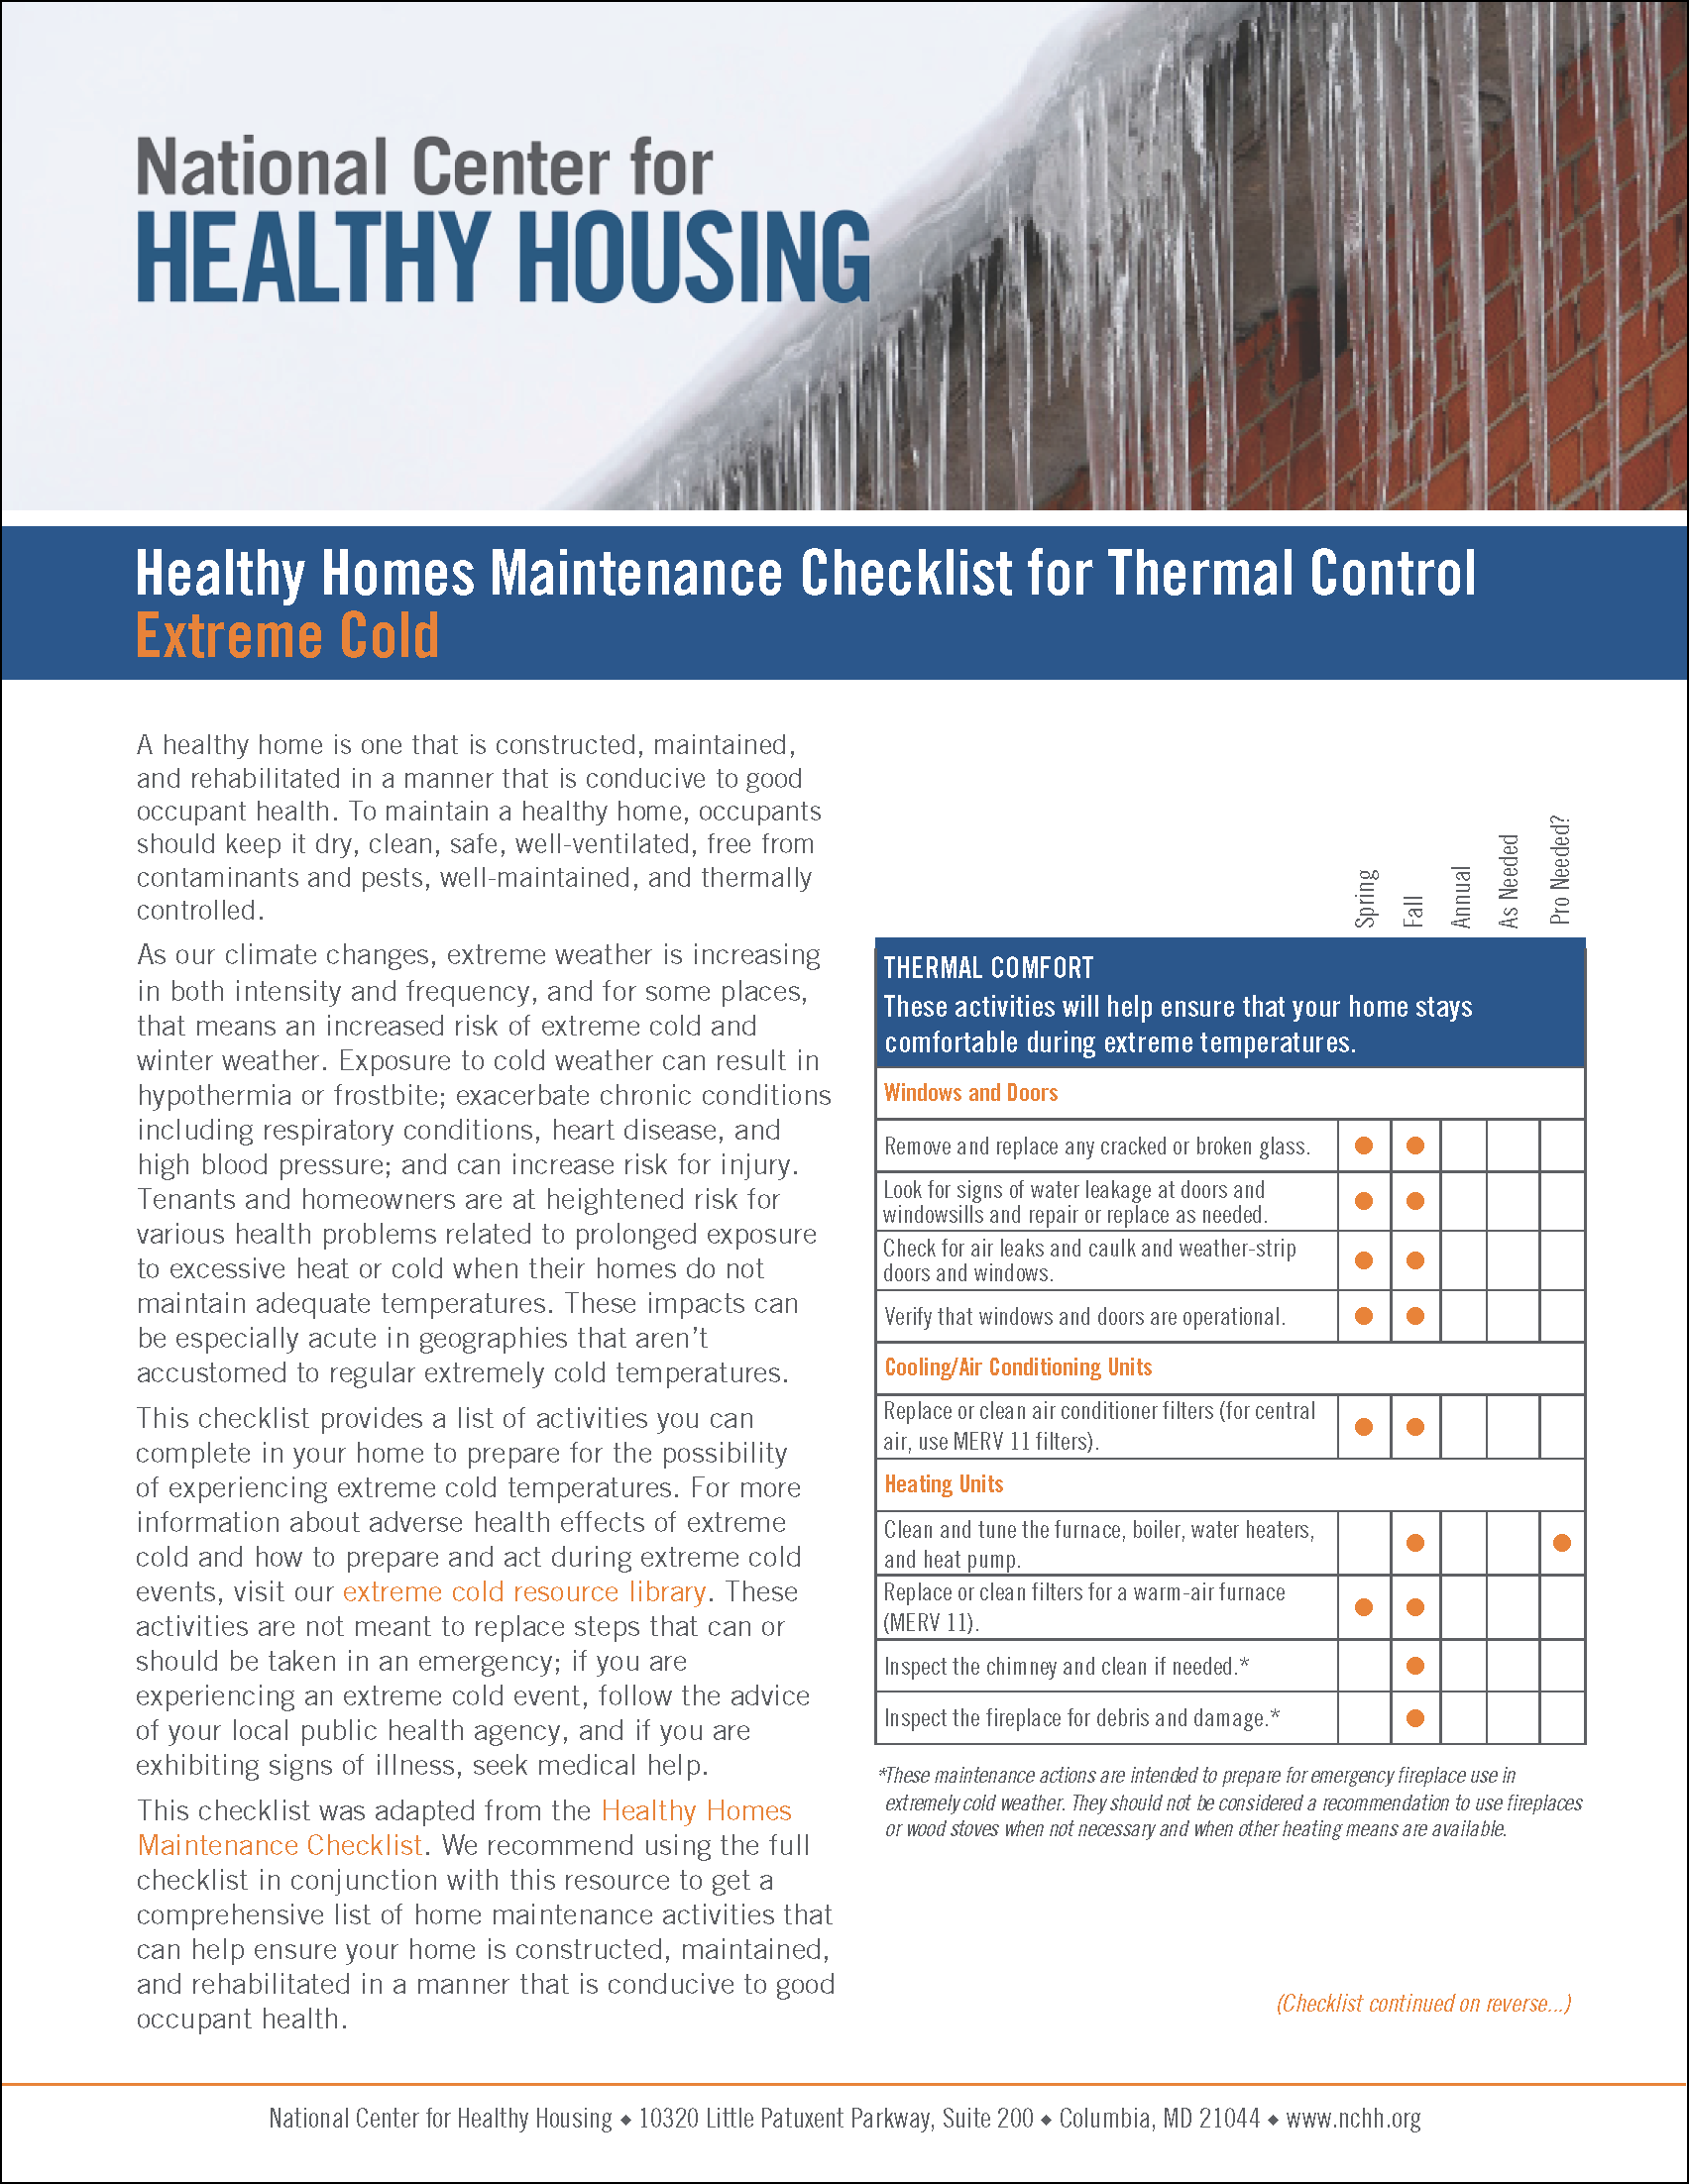 Healthy Homes Maintenance Checklist for Thermal Control: Extreme Cold